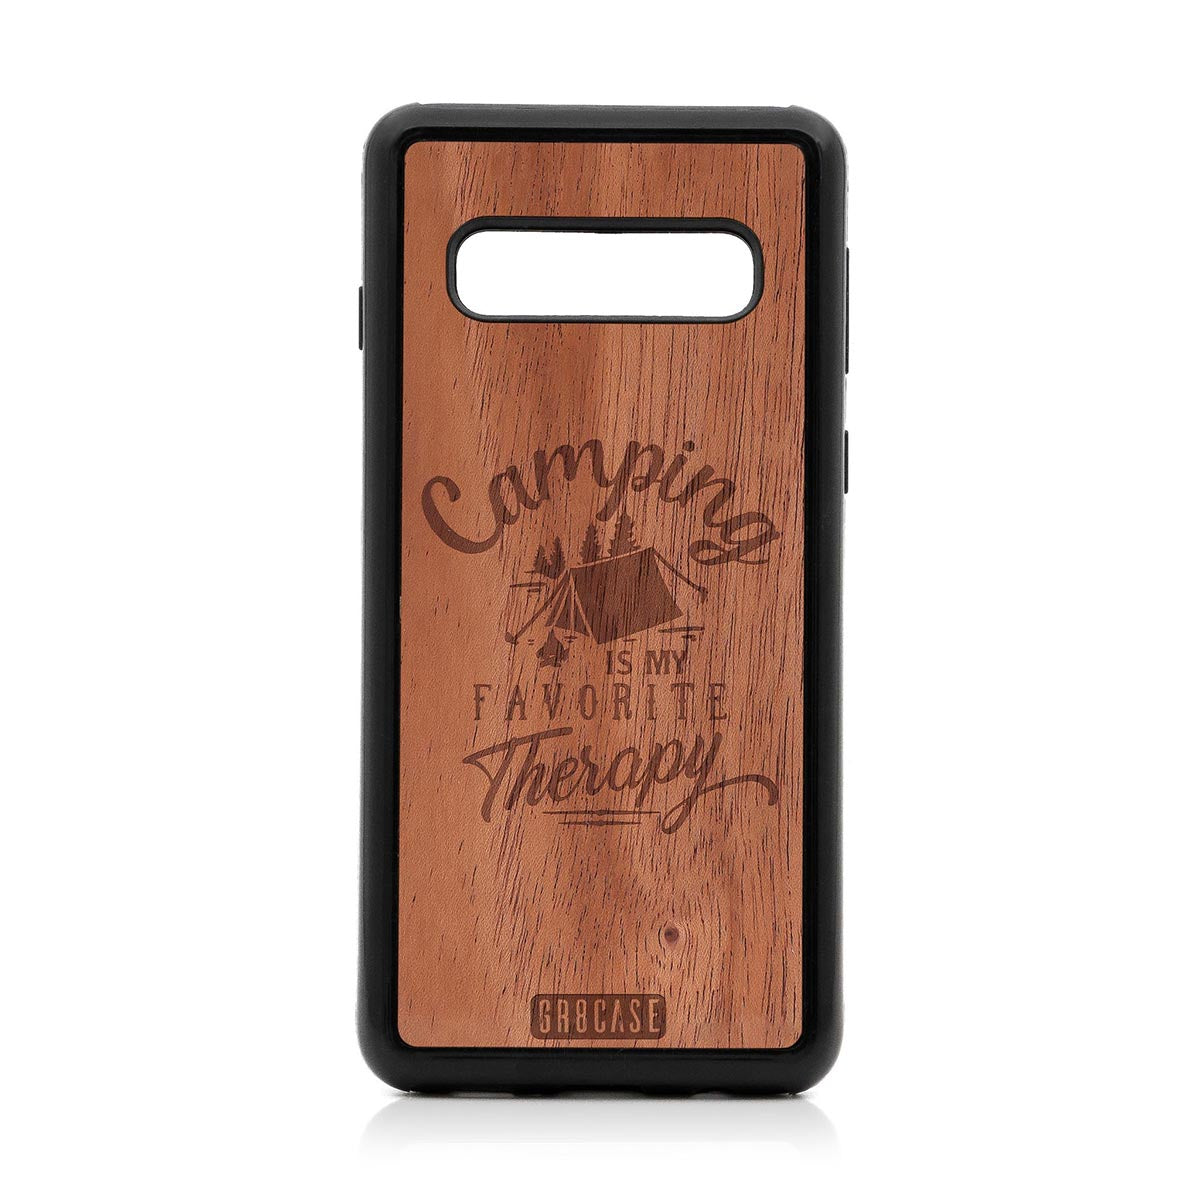 Camping Is My Favorite Therapy Design Wood Case For Samsung Galaxy S10 by GR8CASE